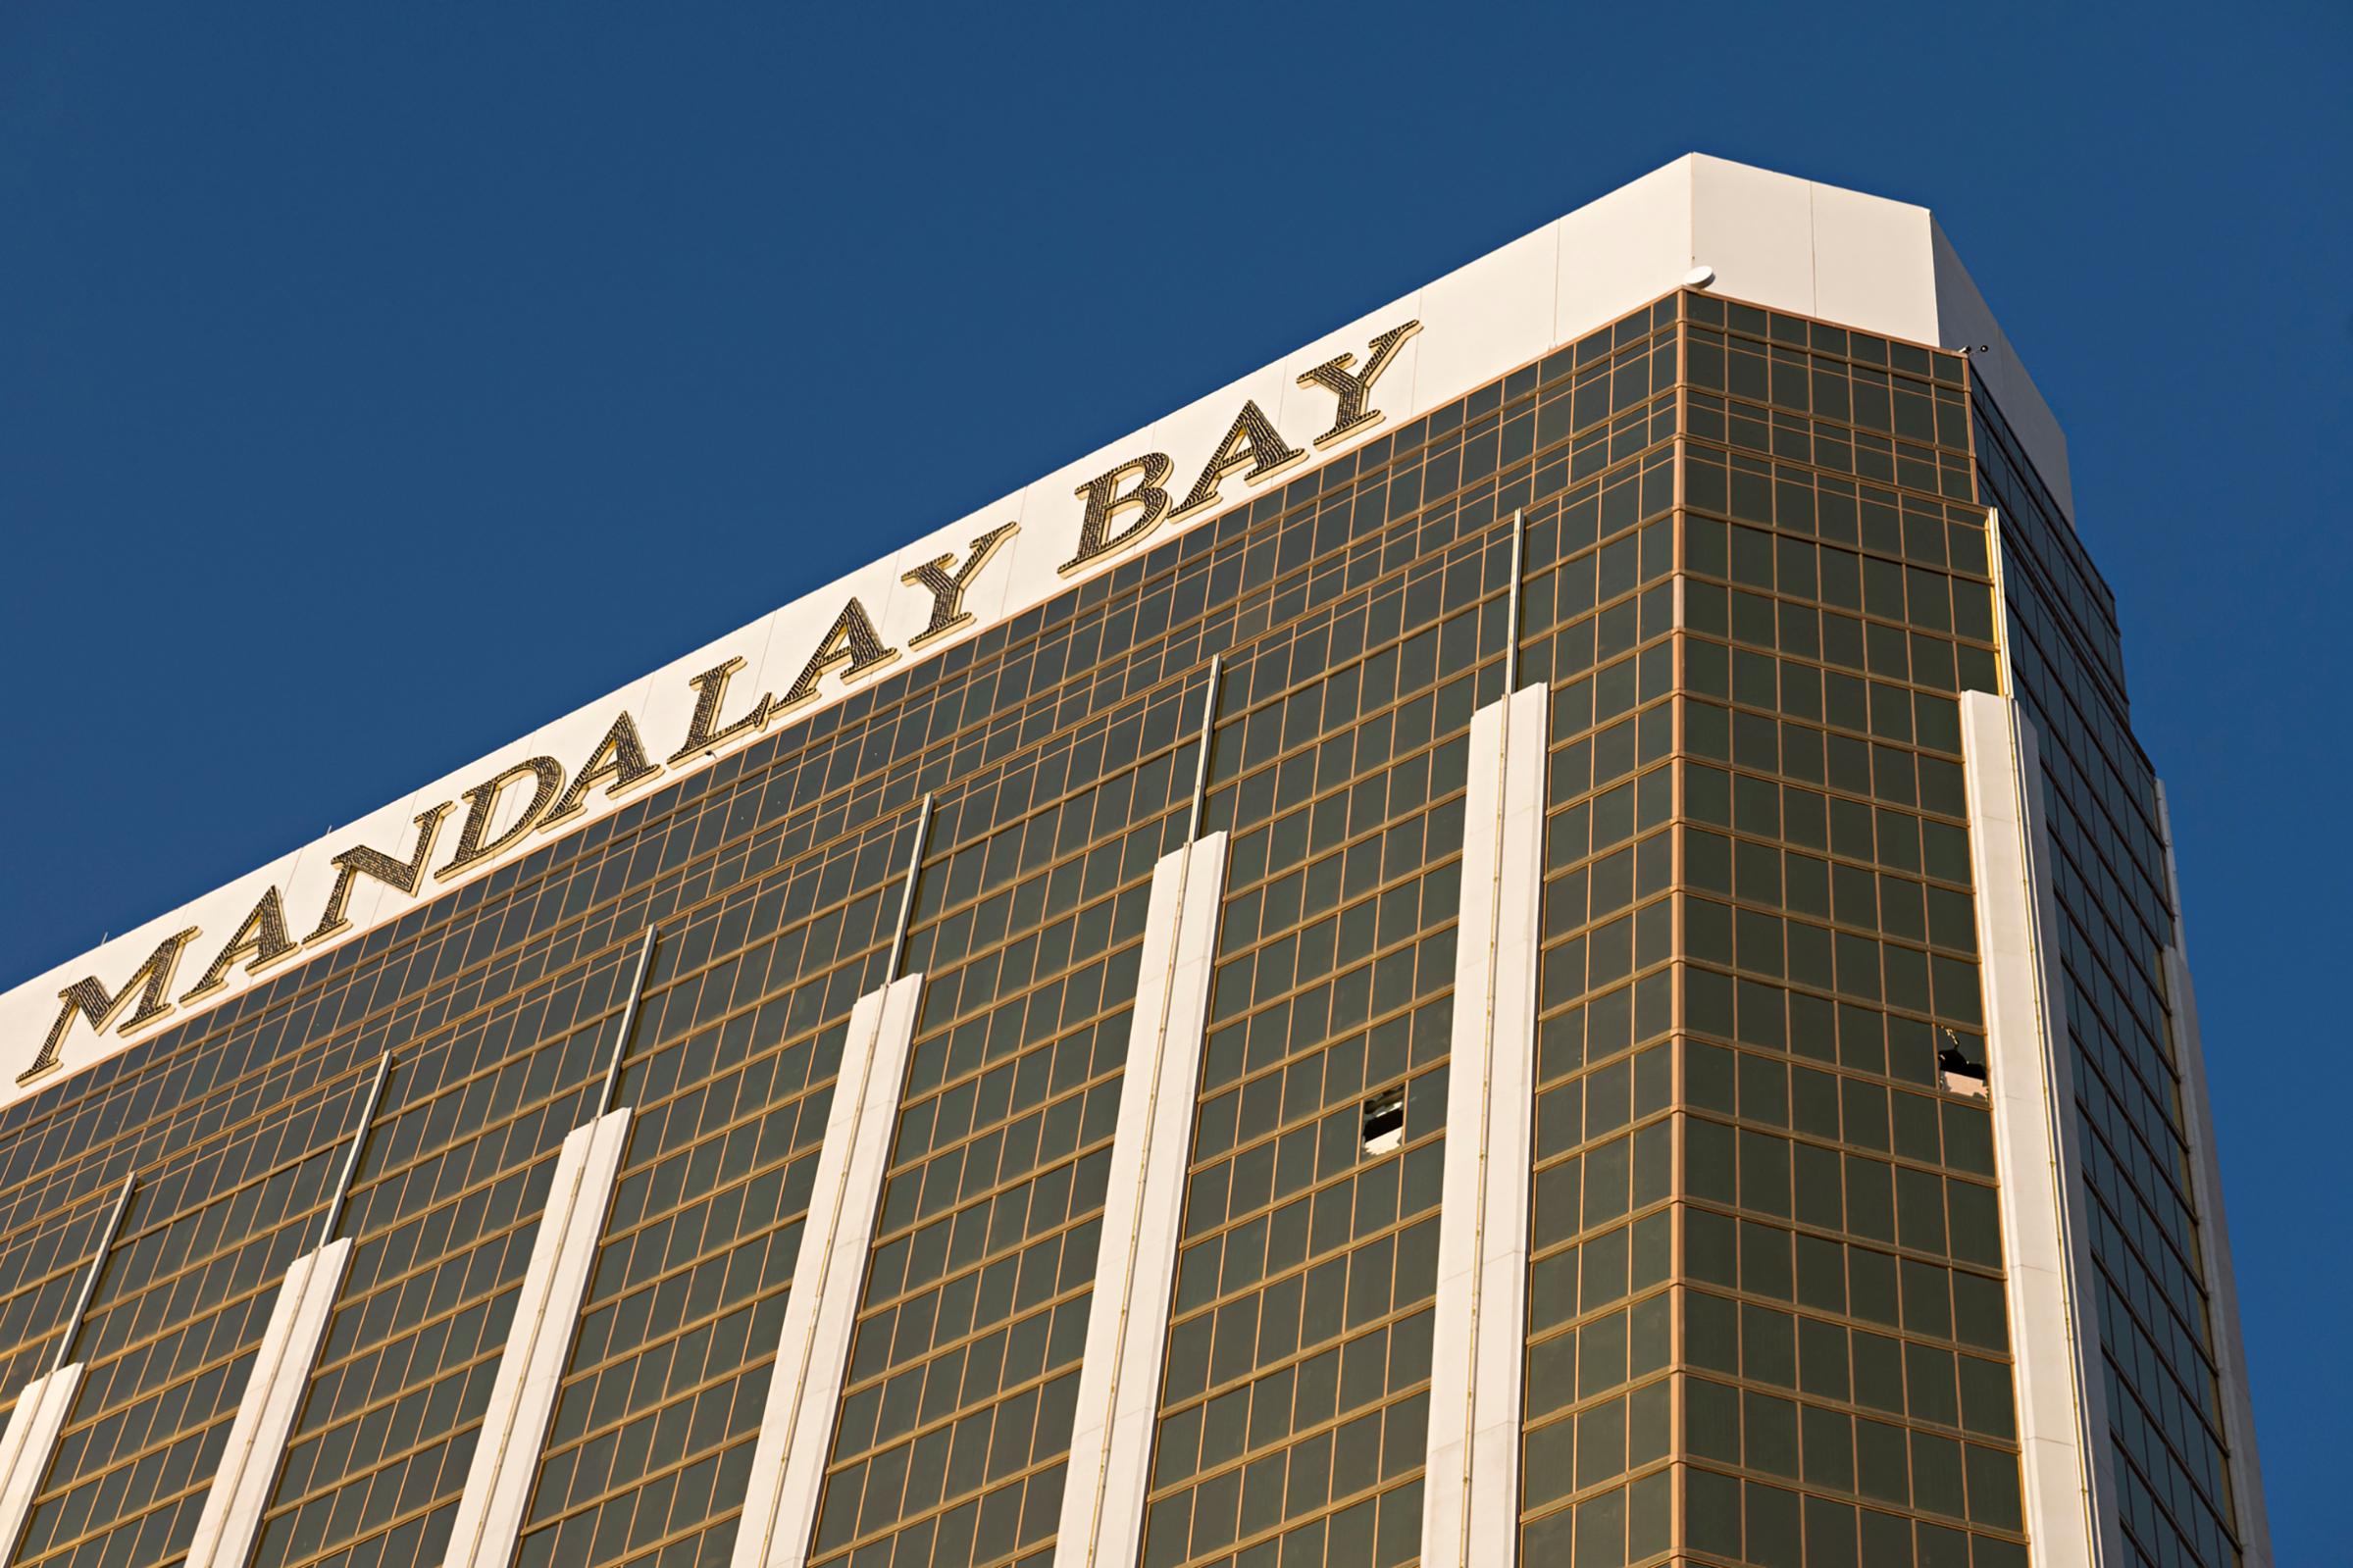 Broken windows on the 32nd floor of the Mandalay Bay Resort and Casino where a gunman opened fire on a concert crowd , Oct. 4, 2017.